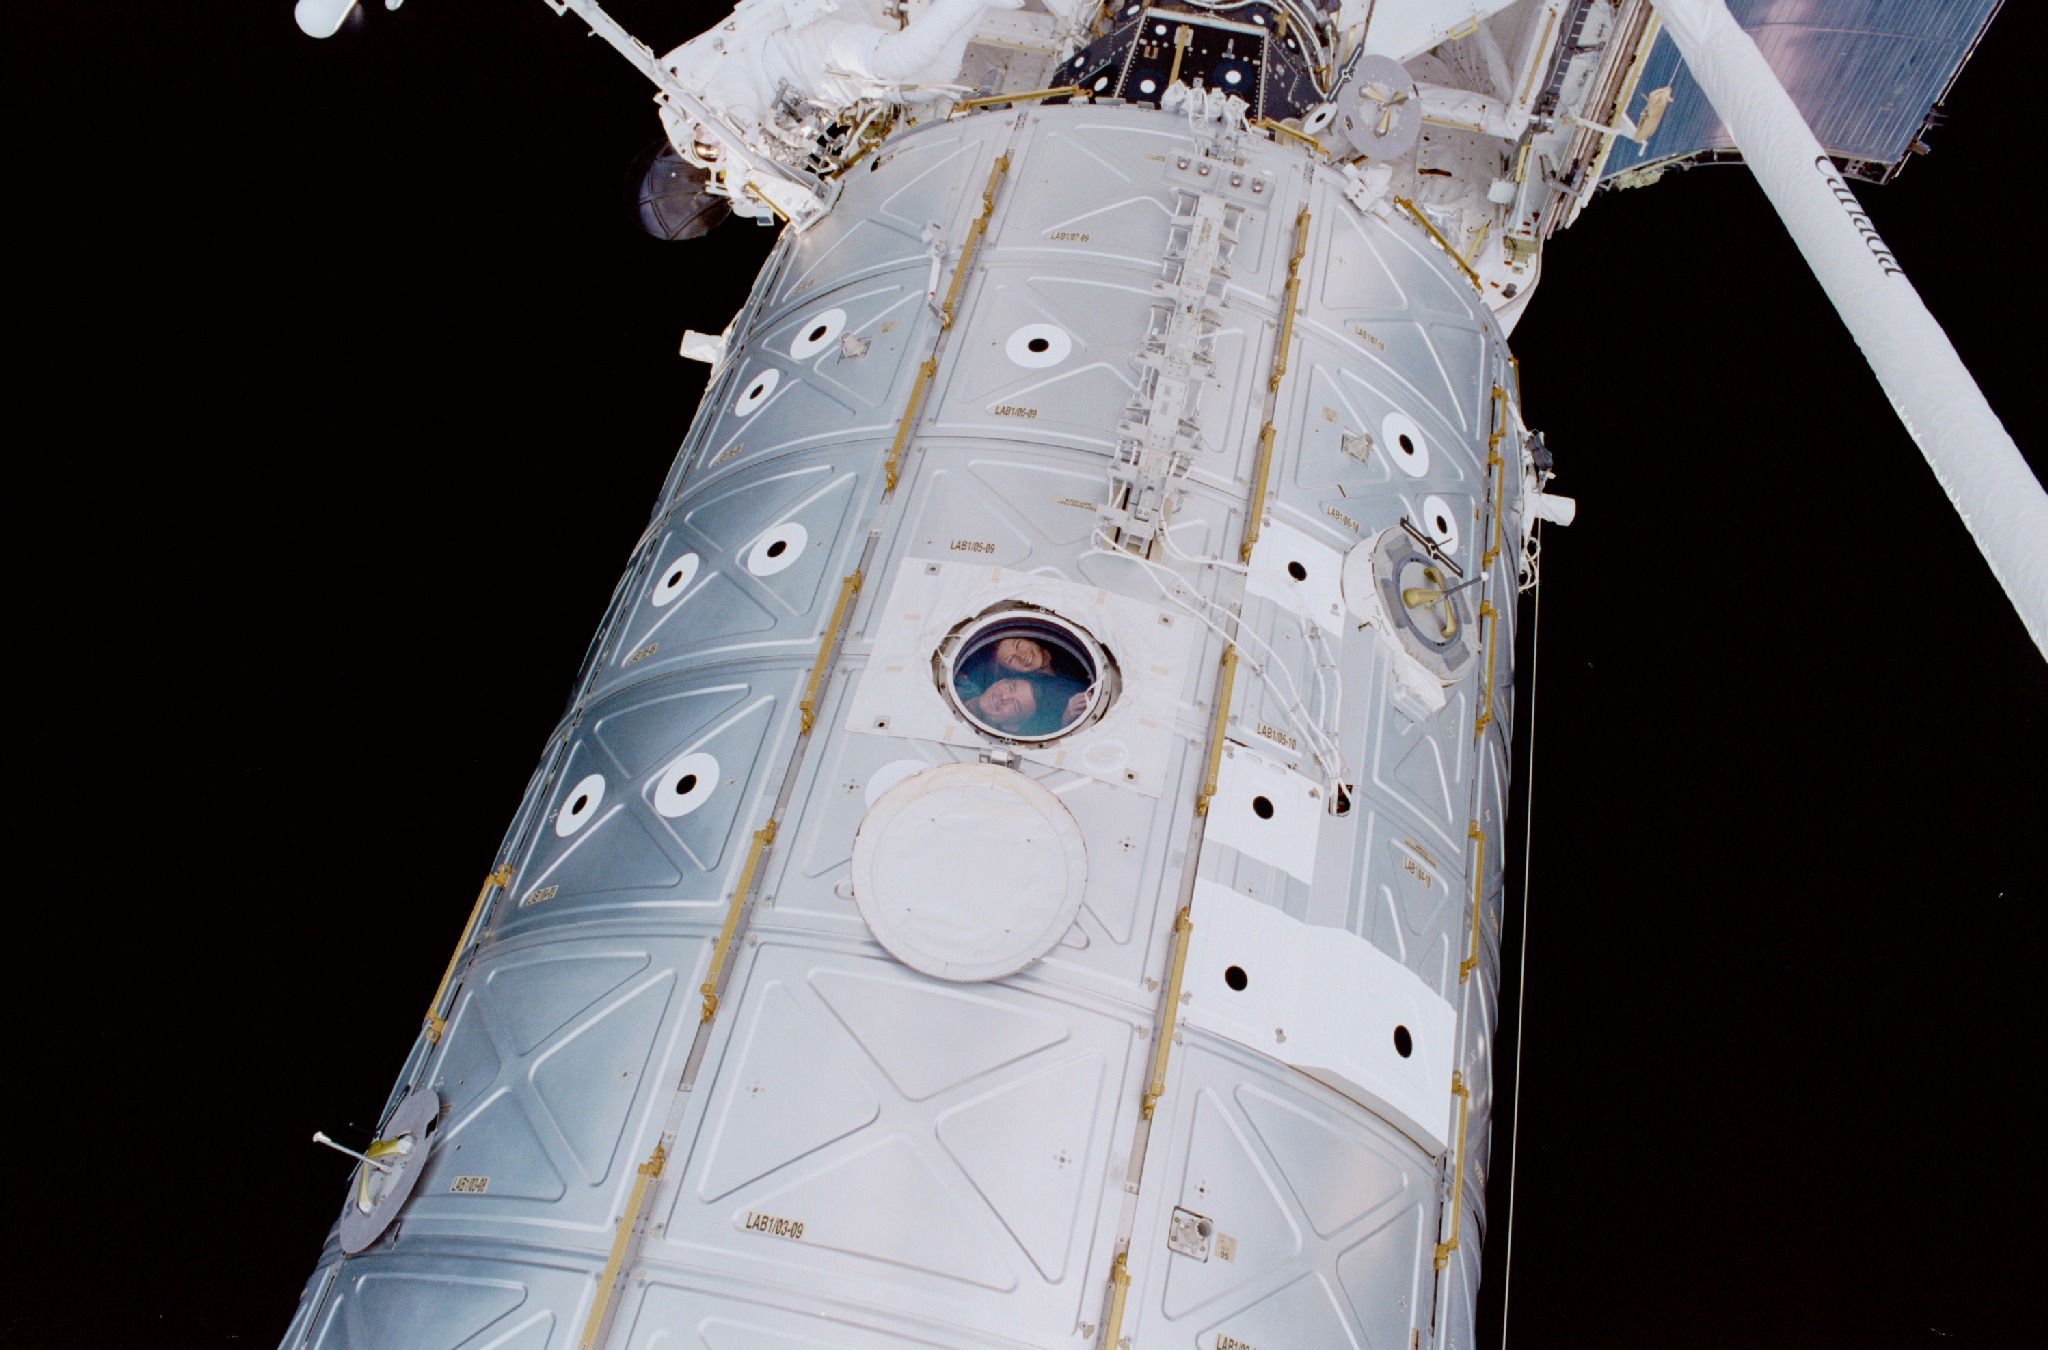 NASA astronauts Susan Helms and James Voss look out of a window on the Destiny laboratory module.